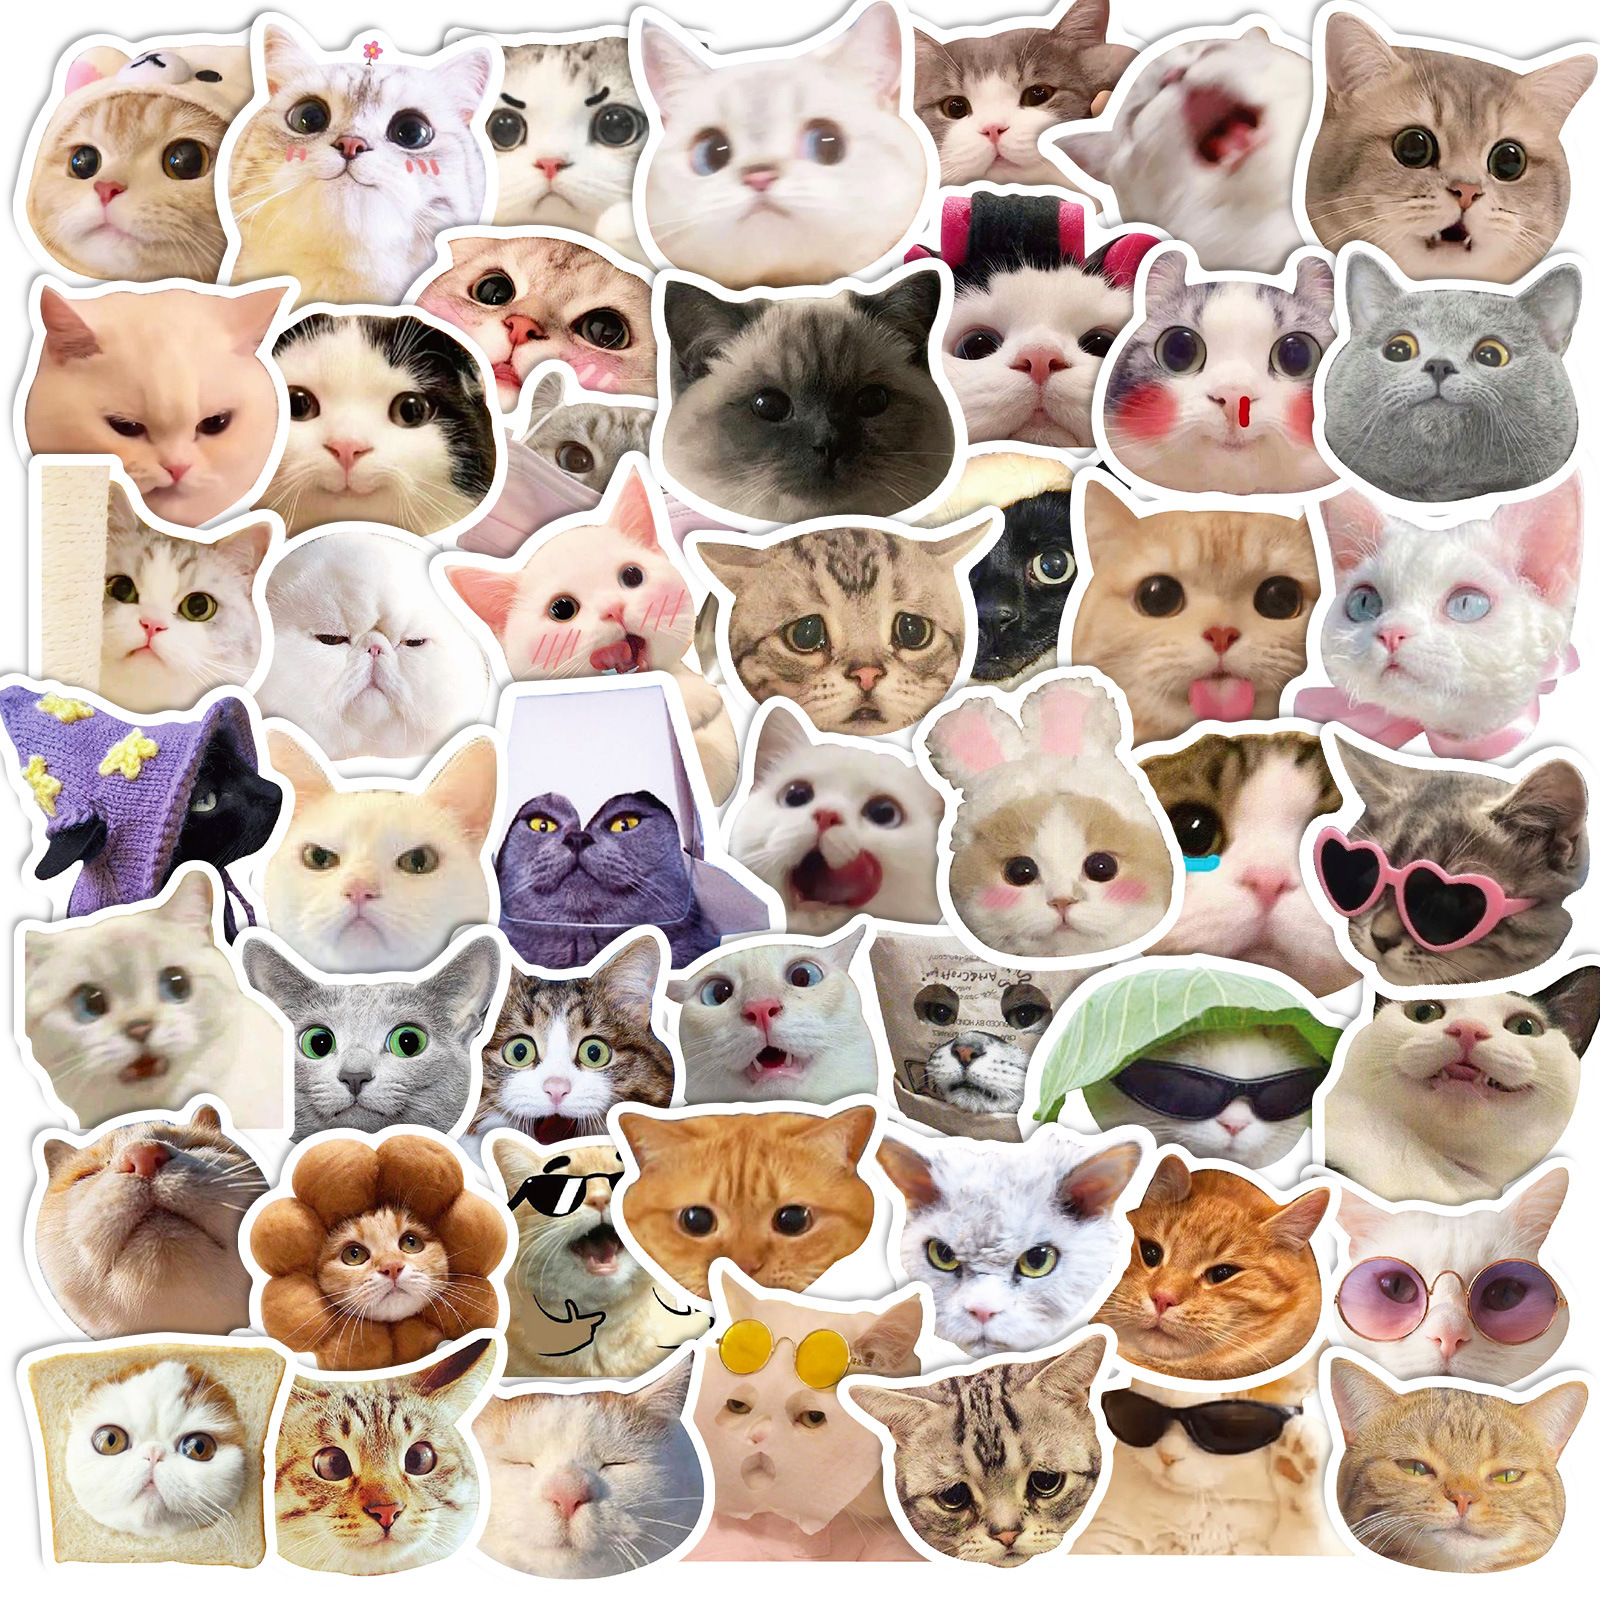 Chic Feline Frenzy: 50 Cat Stickers - Viral Kitty Expressions & Graffiti Decals